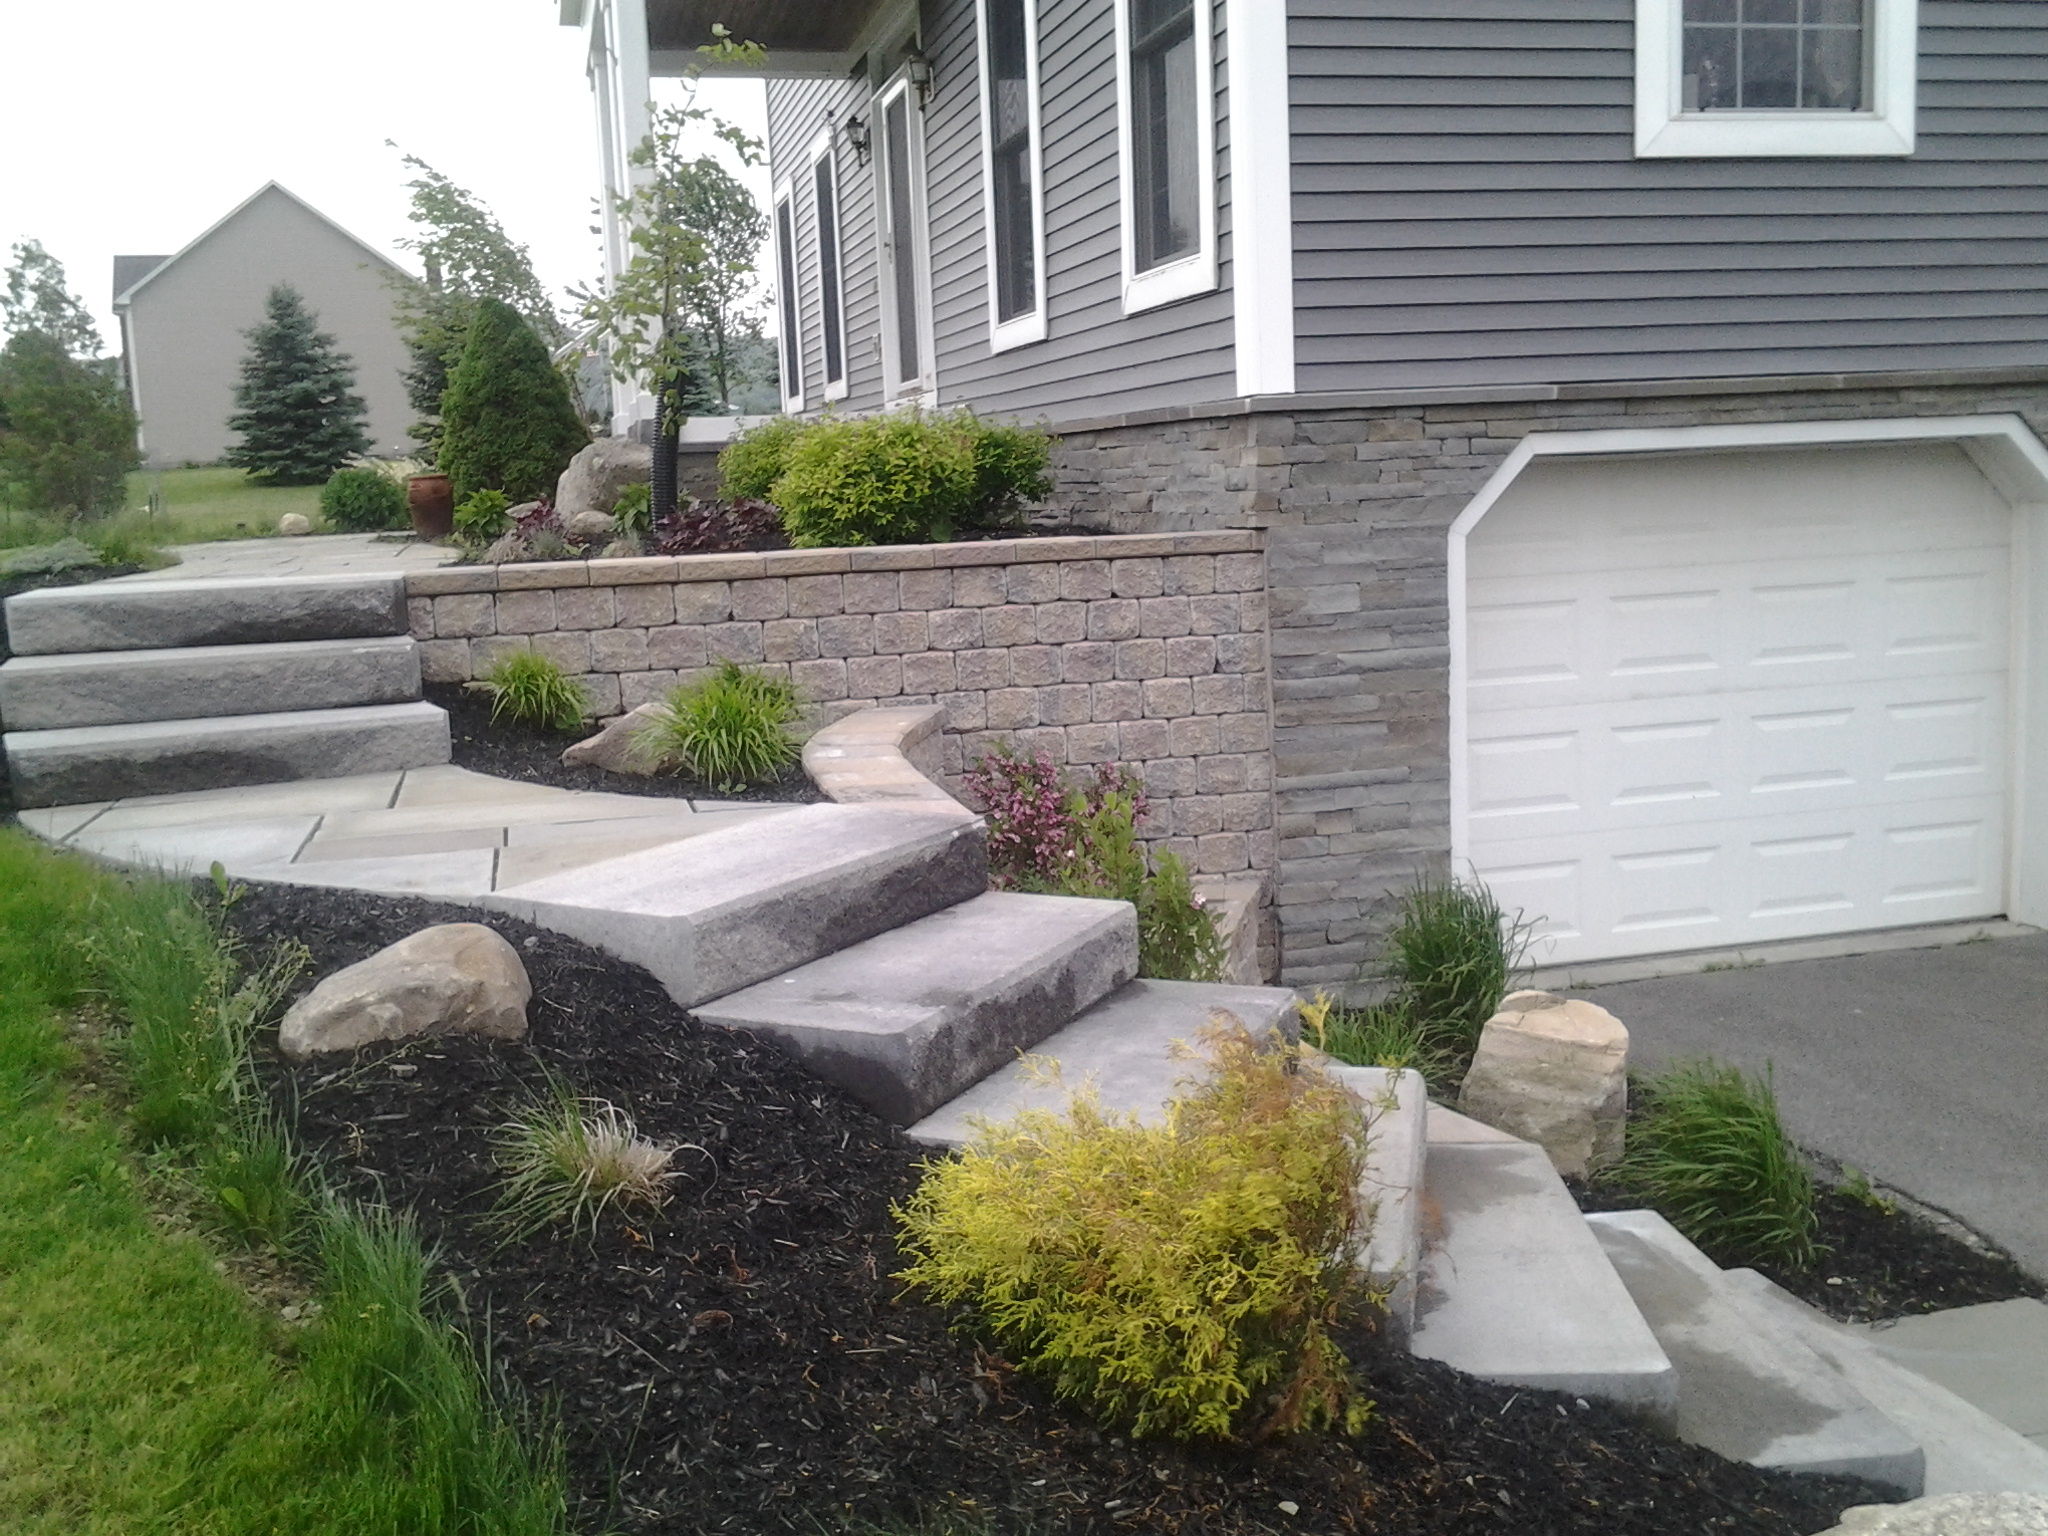 GrassMasters Landscaping Walkway Project